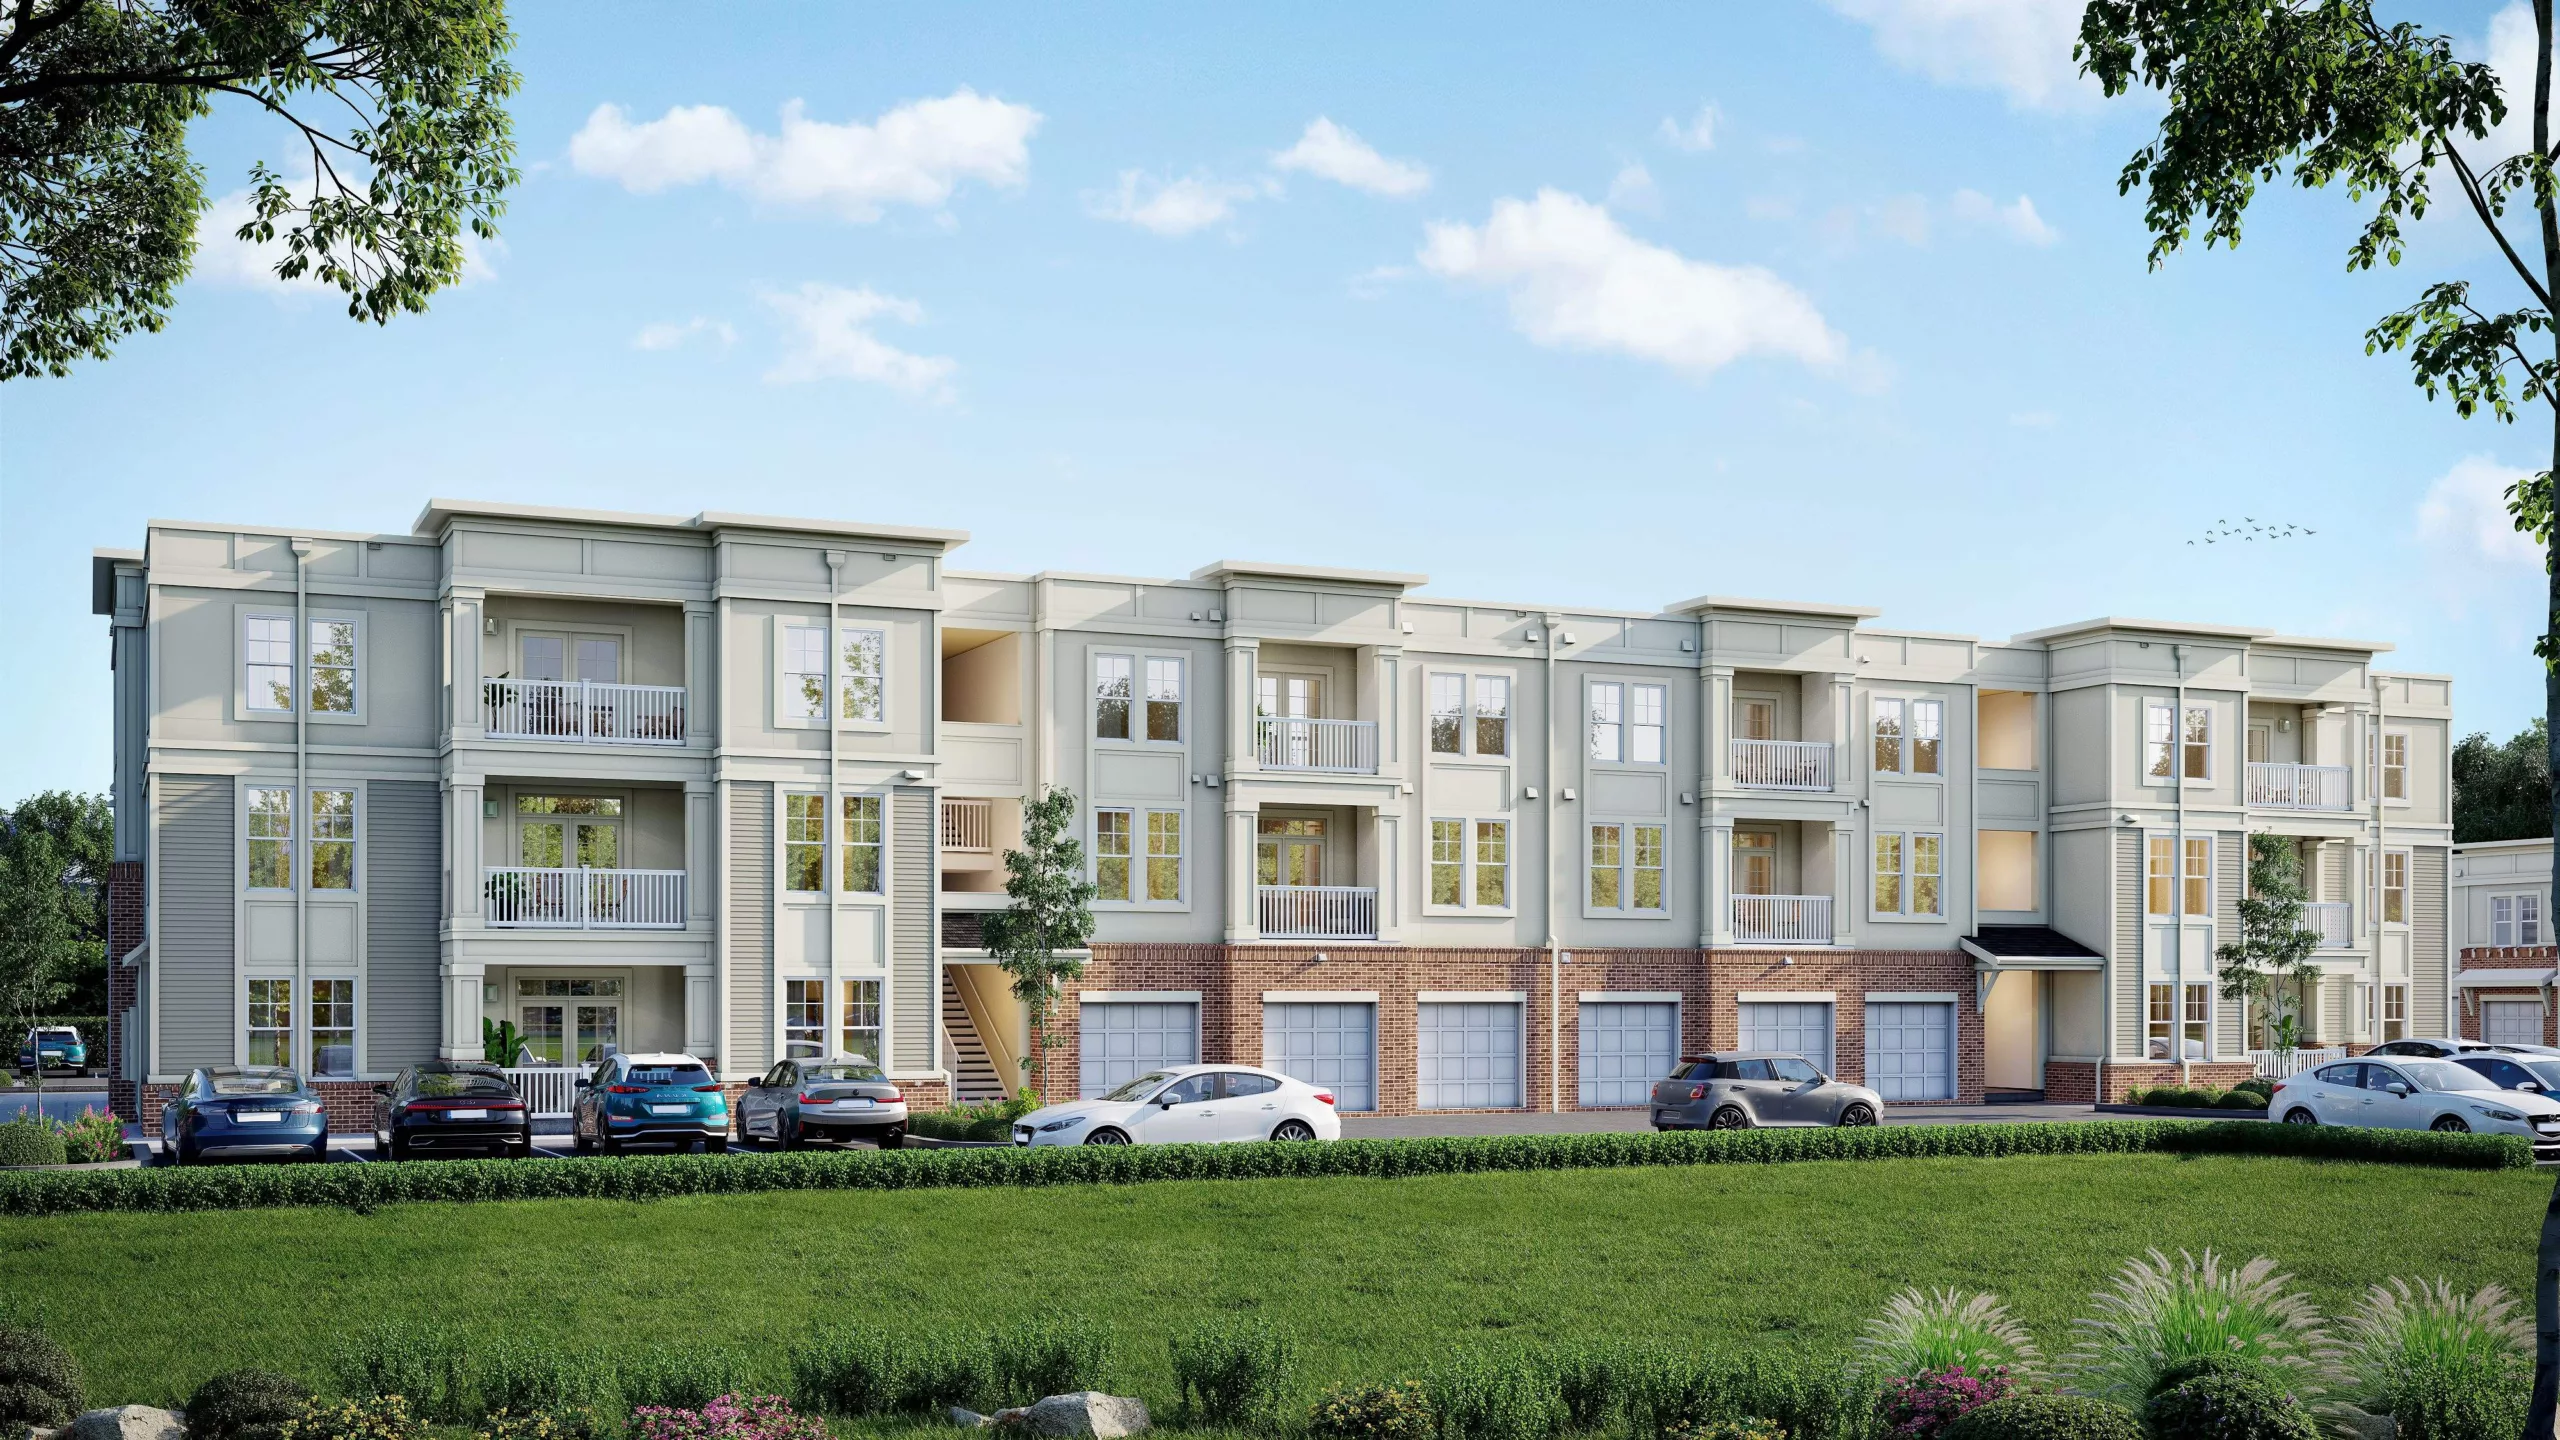 The Breeden Company Continues Virginia Beach Expansion with Construction of 115-Unit Multifamily Community